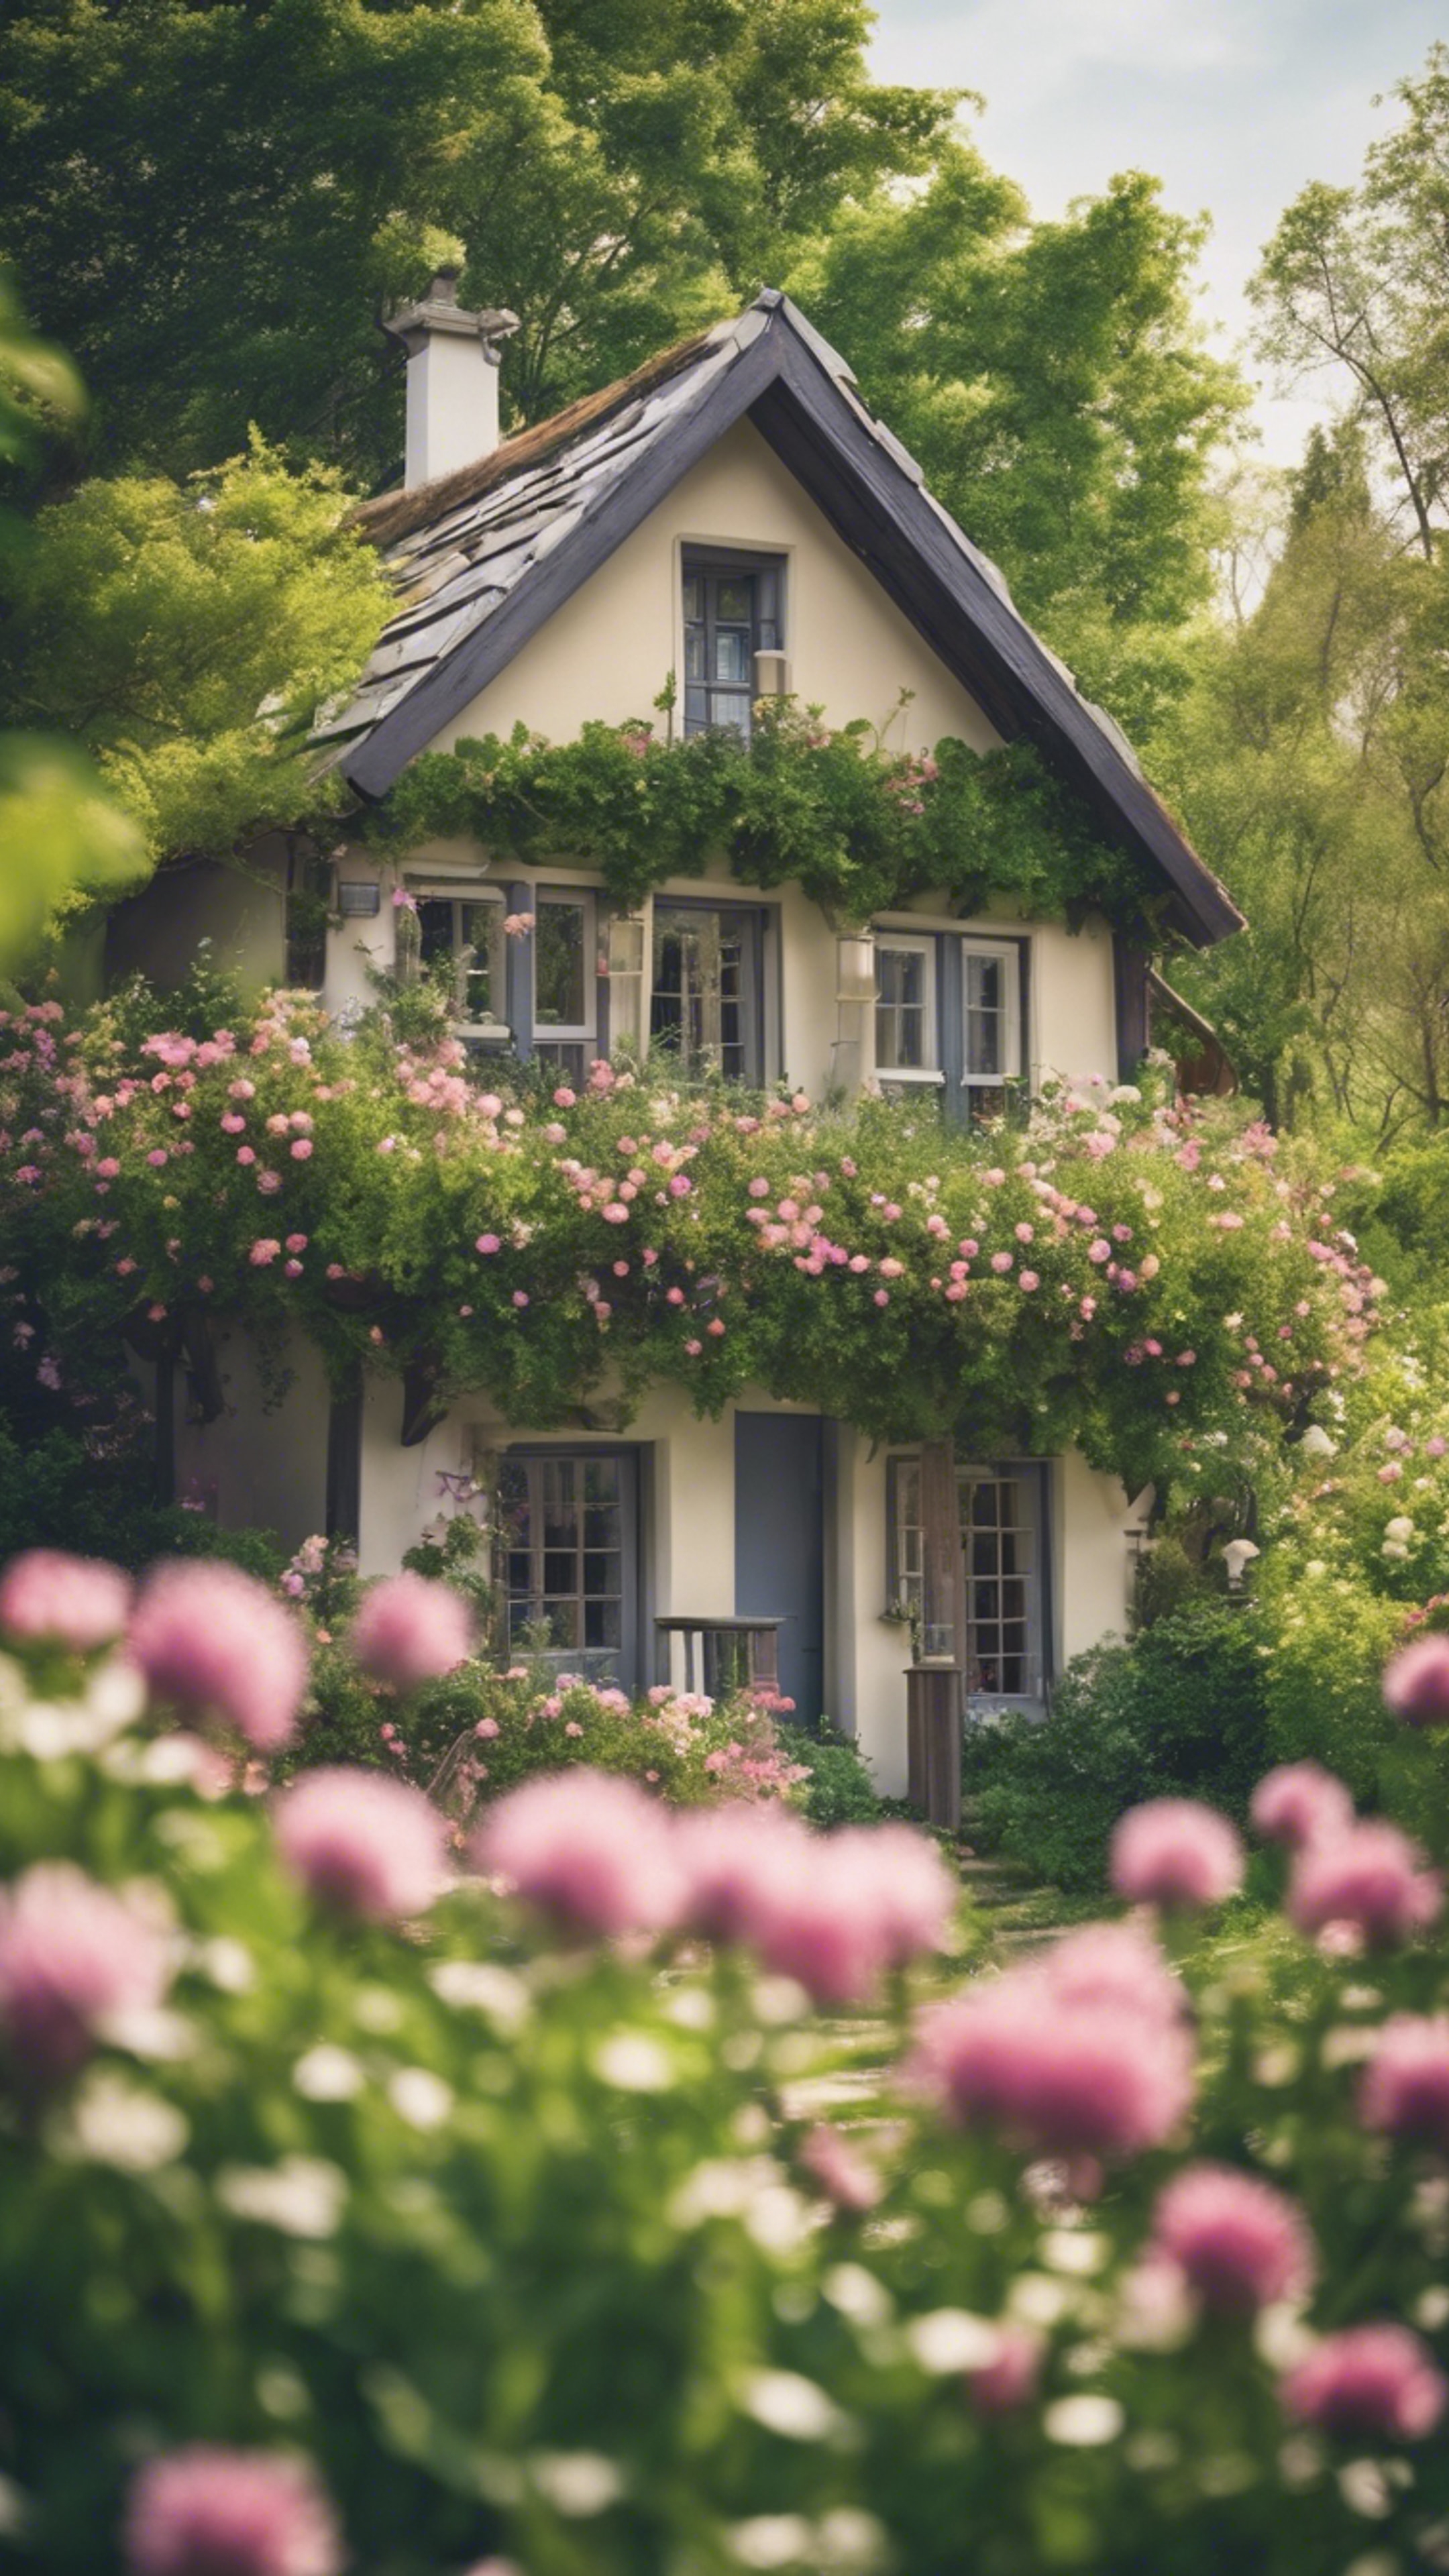 A picturesque scene of a quaint little cottage surrounded by a burst of spring flowers and new green foliage. 墙纸[ad9cdb560dce44d082cc]